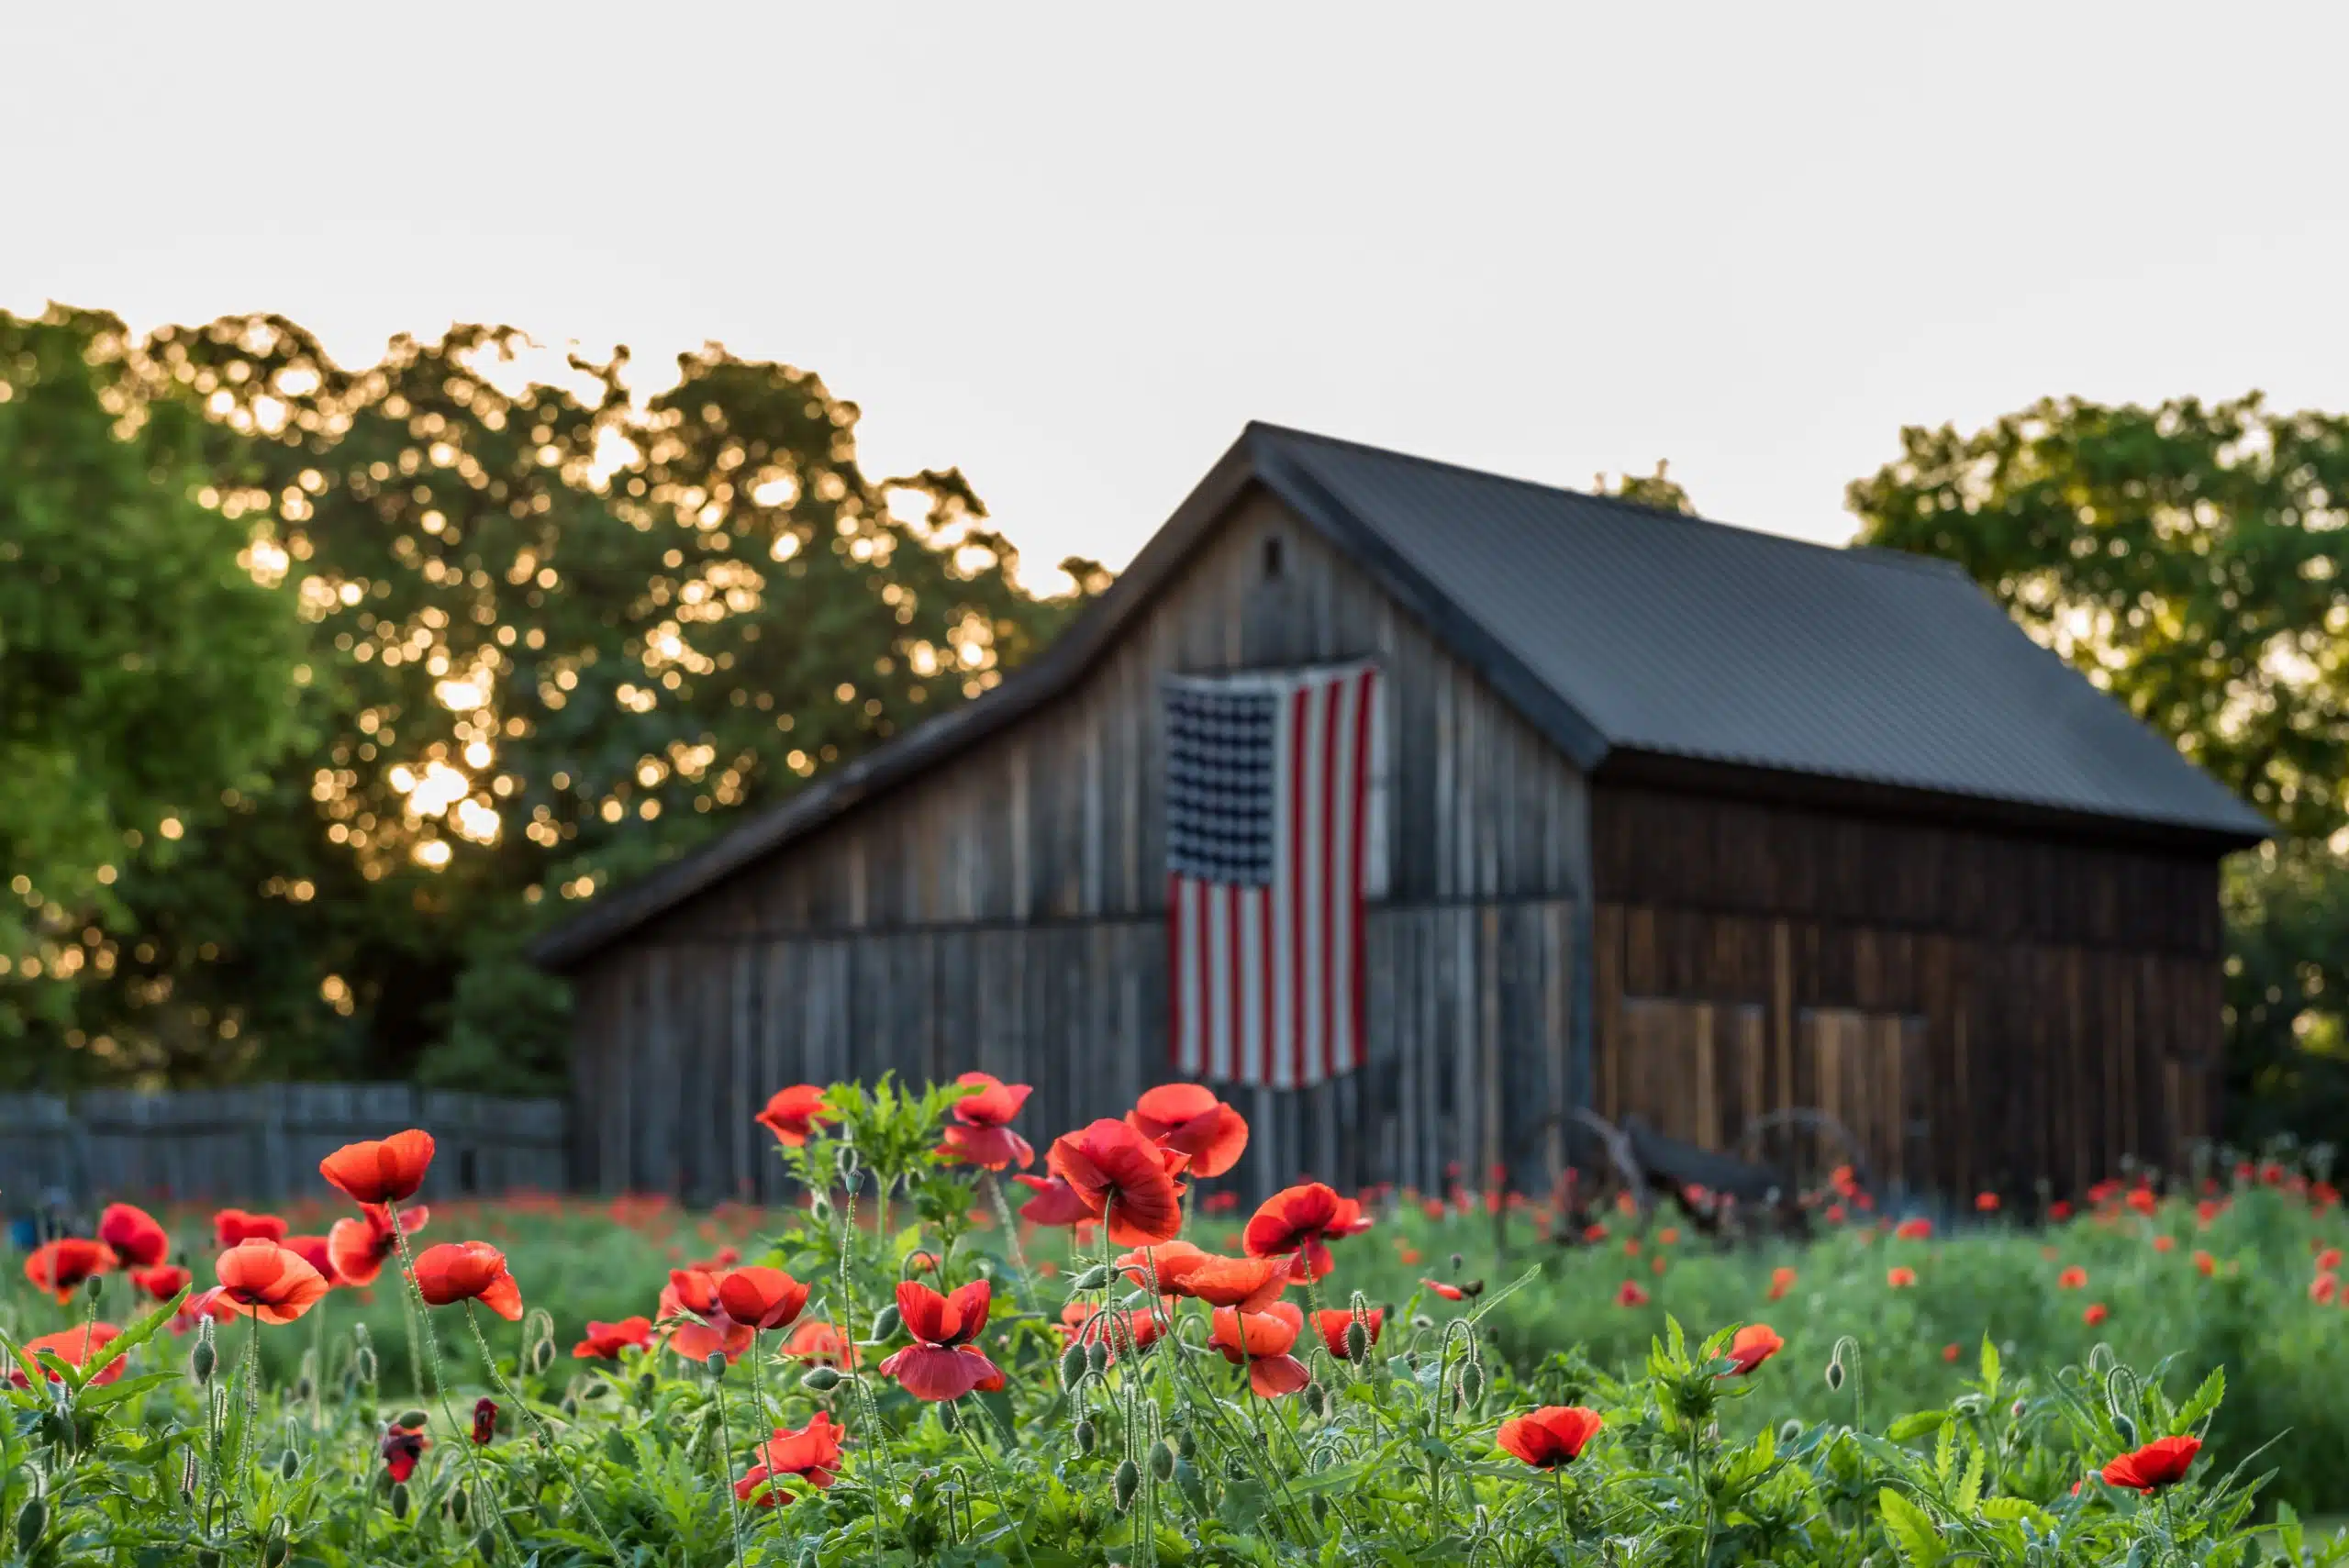 A barn with the US flag hanging, vivid red poppies in the front yard.